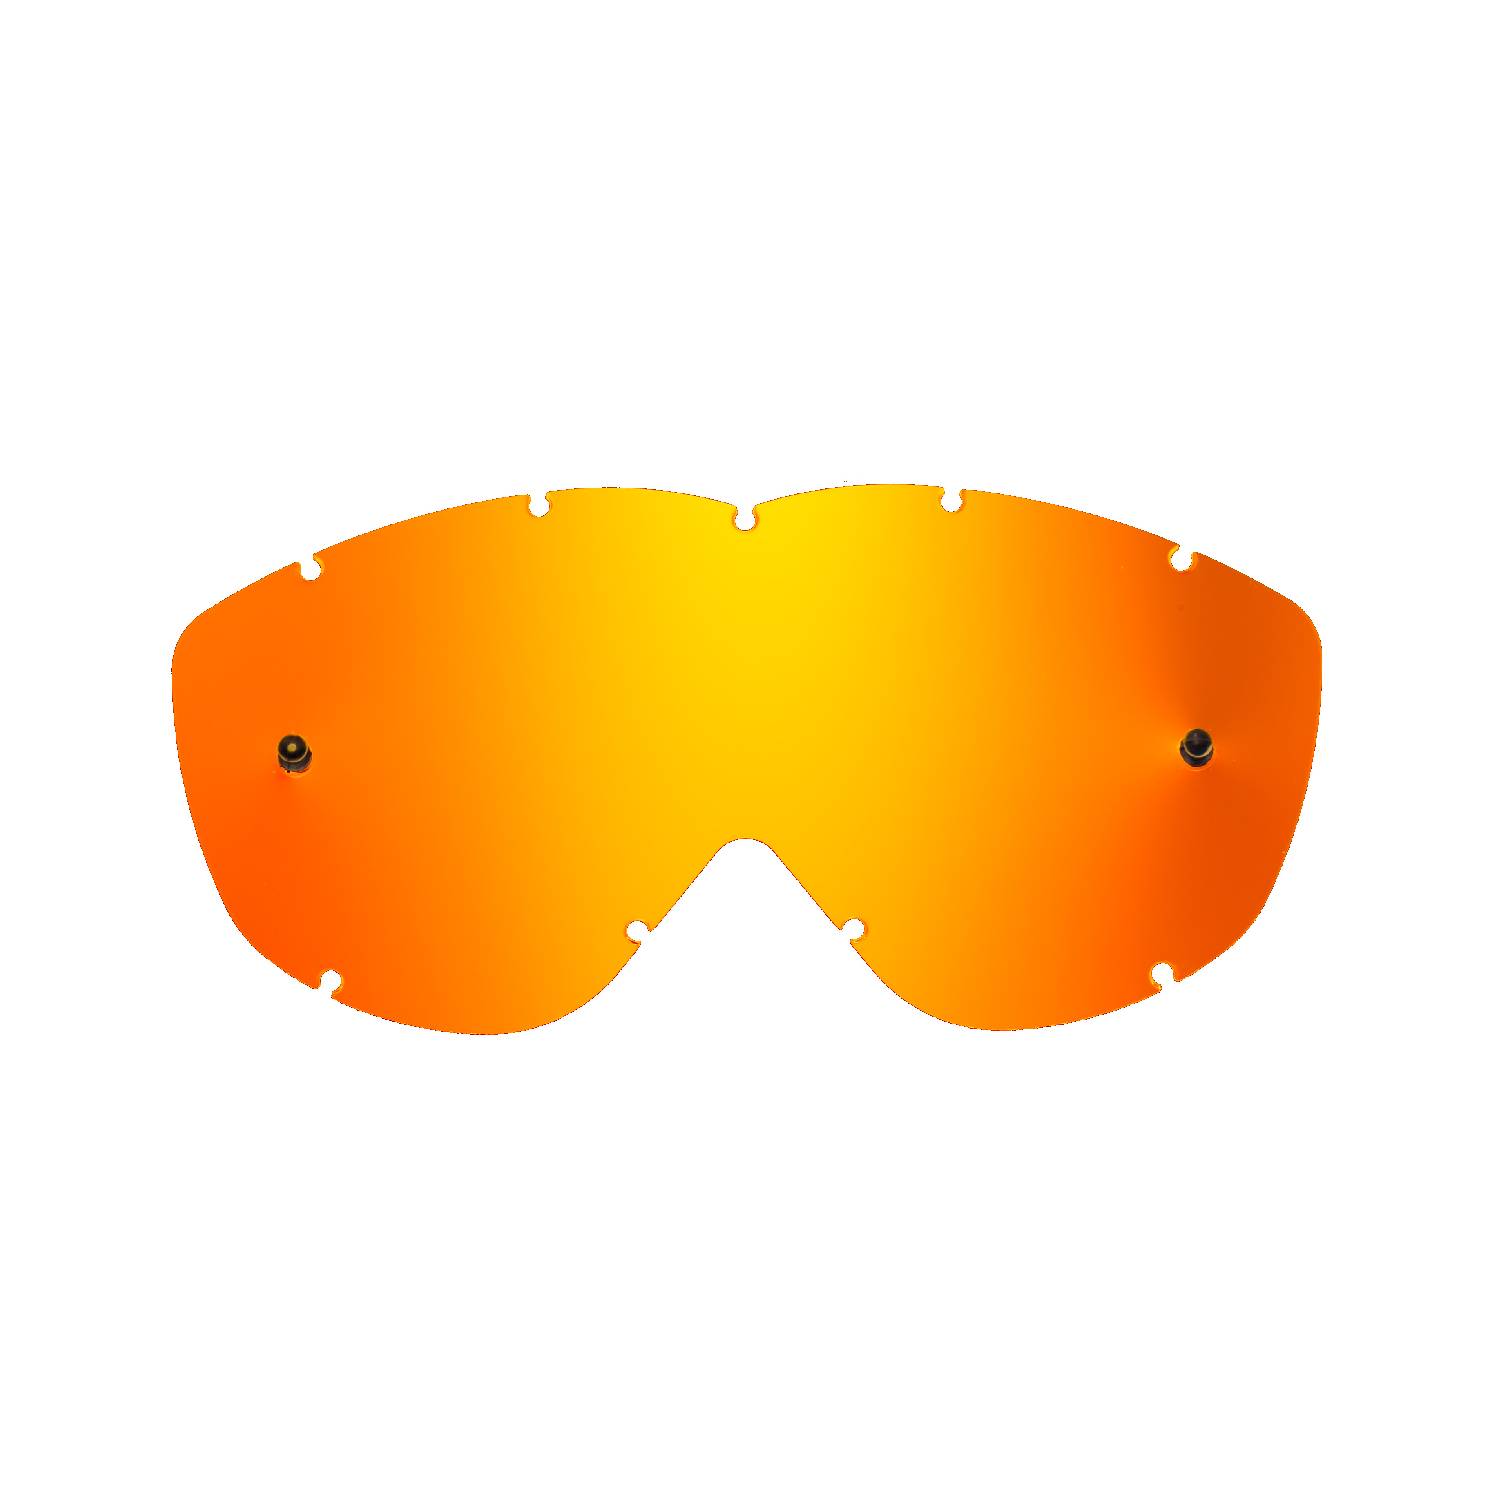 red-toned mirrored replacement lenses for goggles compatible for Spy Alloy / Targa goggle